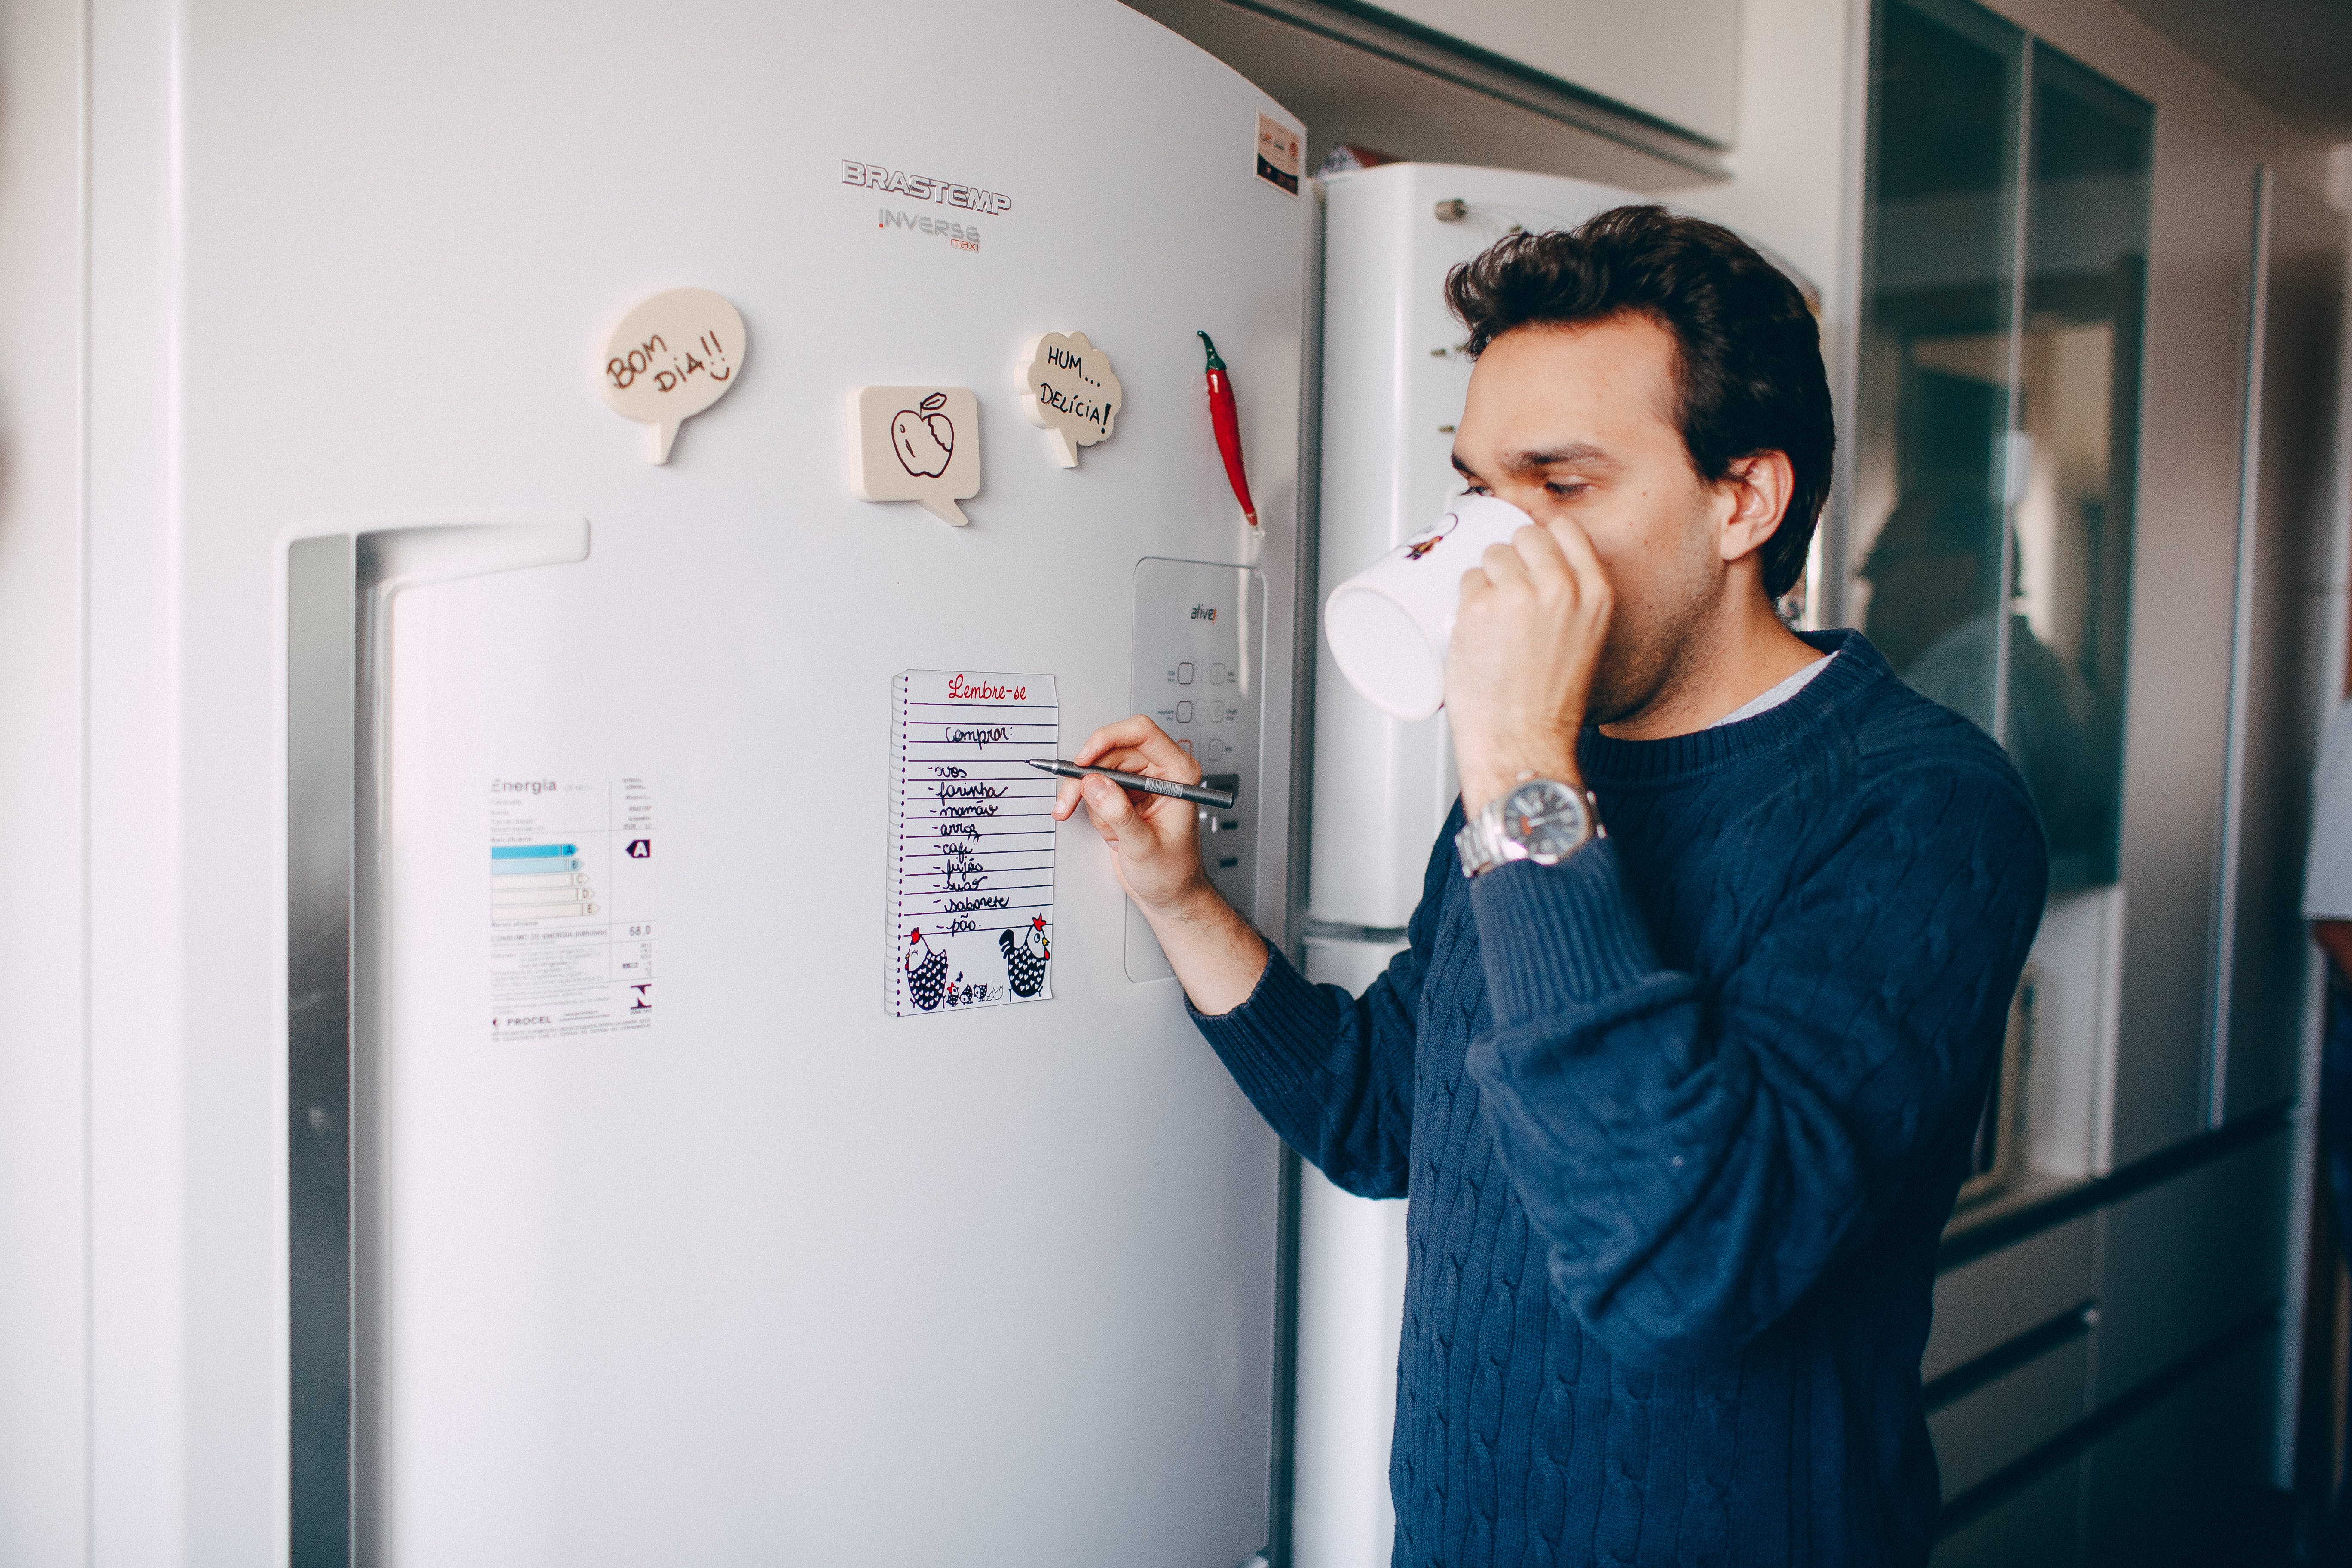 A man drinking from his mug while writing something on a paper stuck on a fridge | Source: Pexels